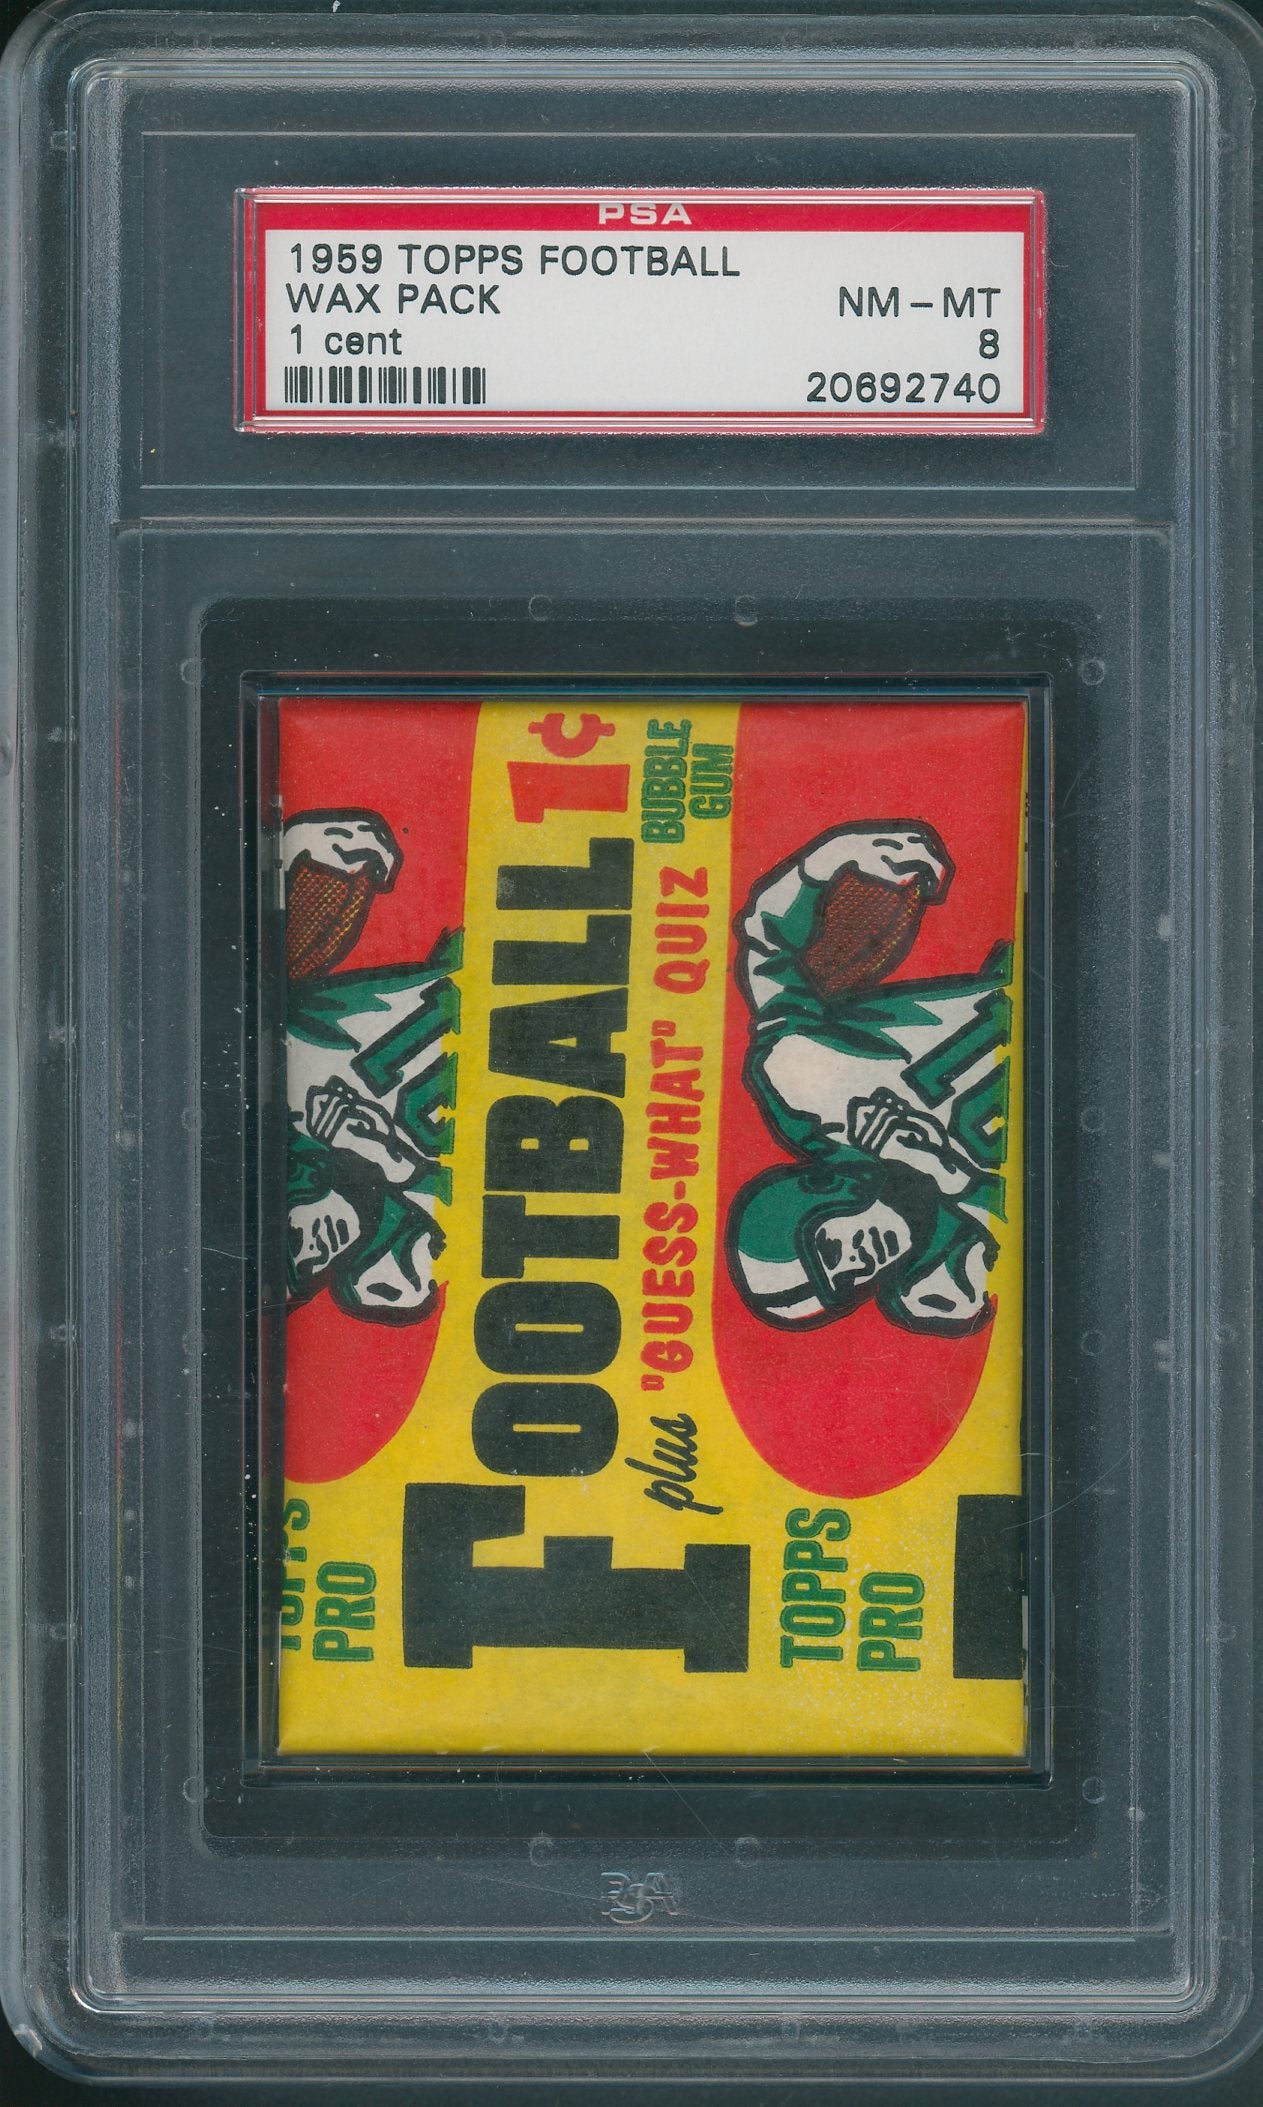 1959 Topps Football Unopened 1 Cent Wax Pack PSA 8 (*2740)